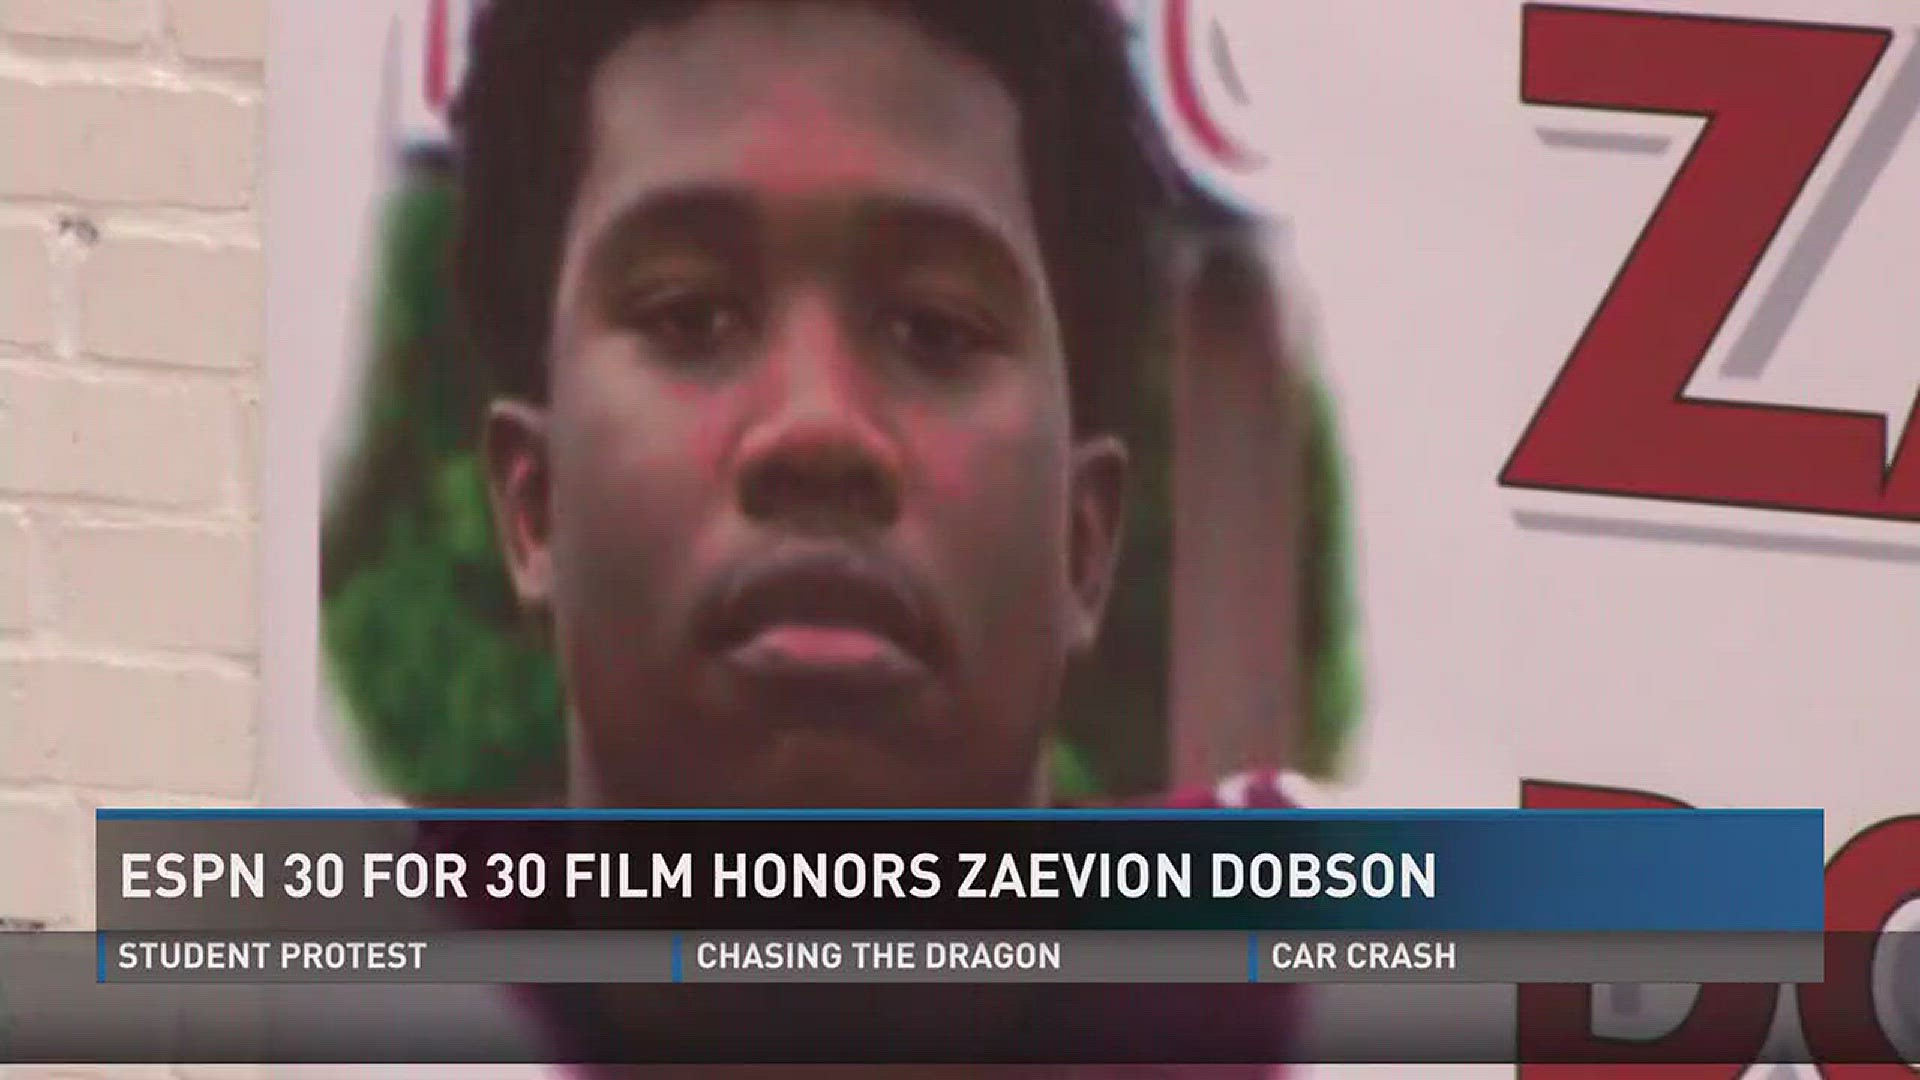 Zaevion Dobson died in December 2015 while shielding his friends from gunfire.